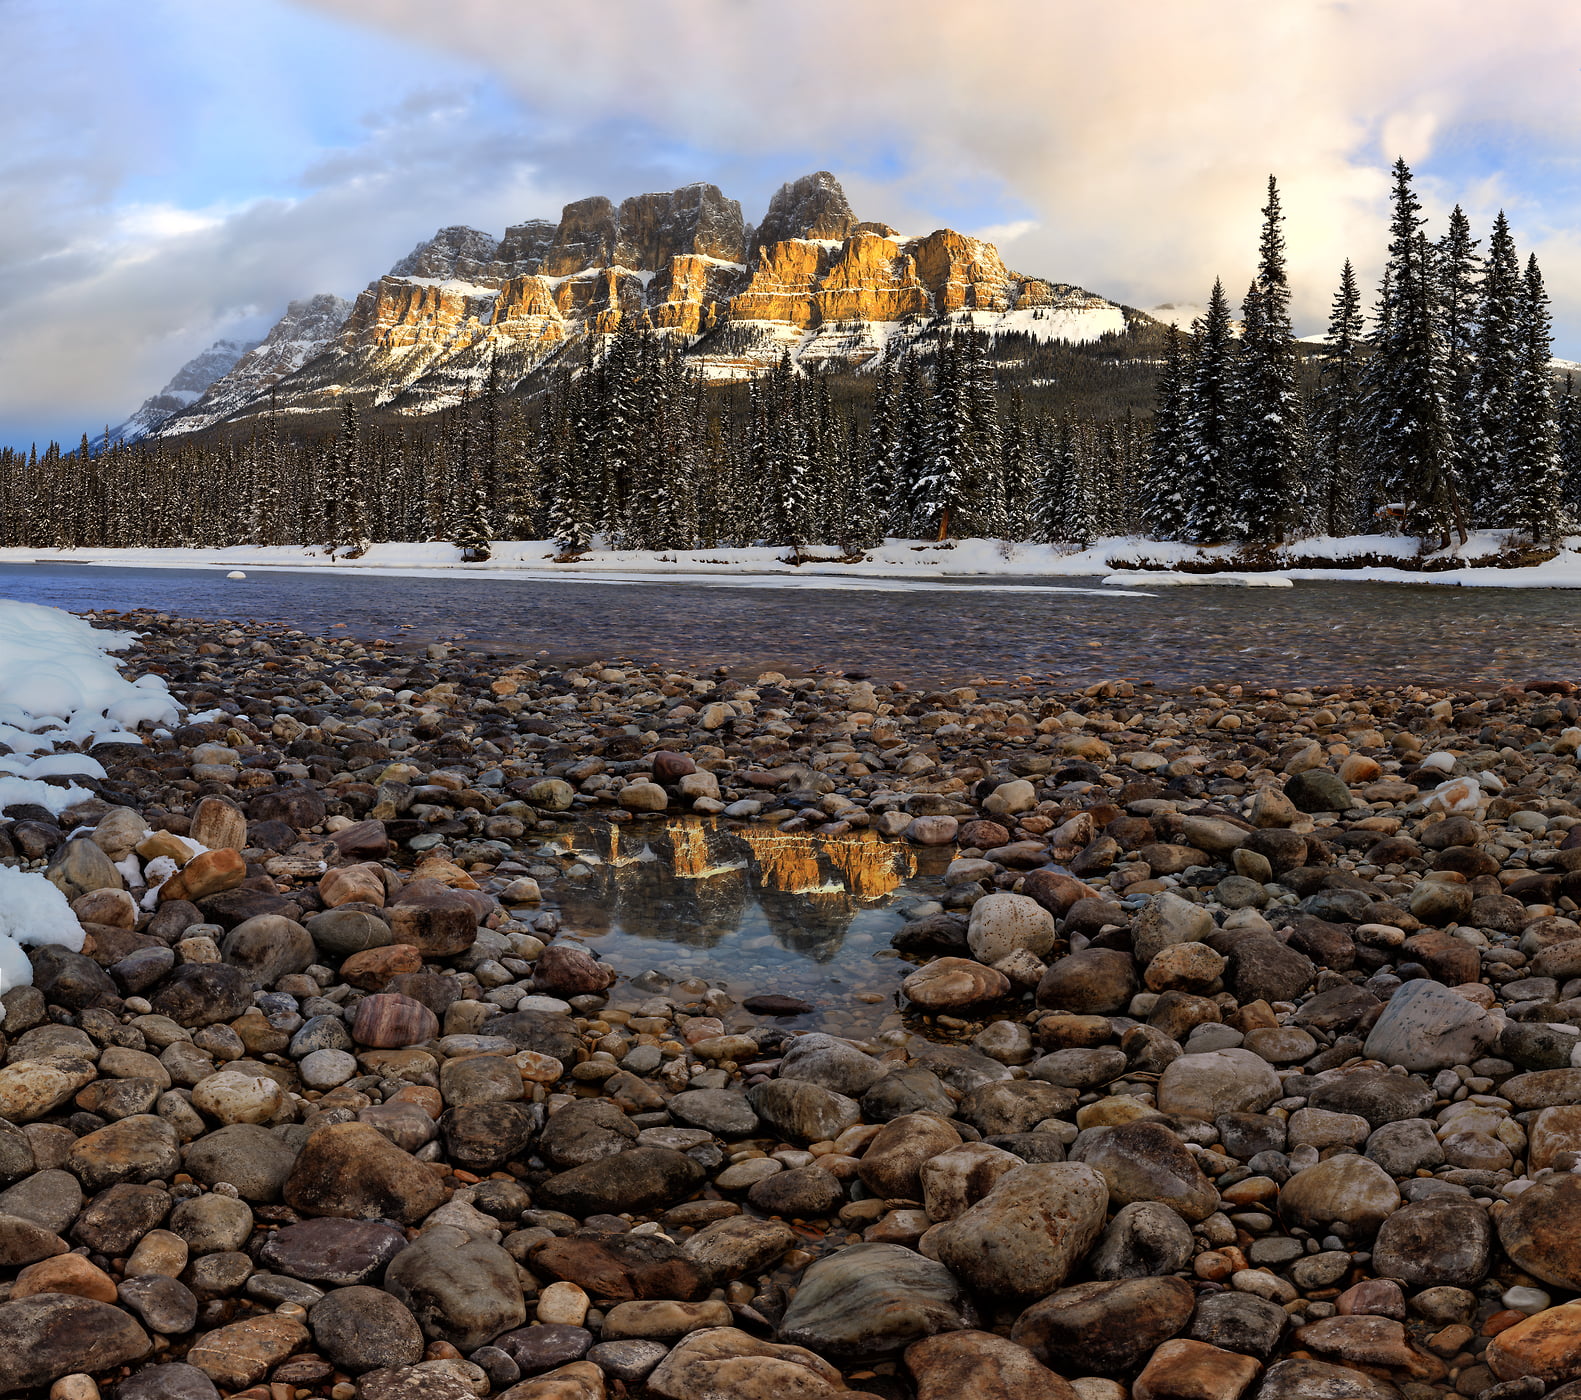 1,123 megapixels! A very high resolution, large-format VAST photo print of a stream with rocks on the side, backdropped by a snowy forest and large mountain range with Castle Mountain; landscape photograph created by Scott Dimond in Banff National Park, Alberta, Canada